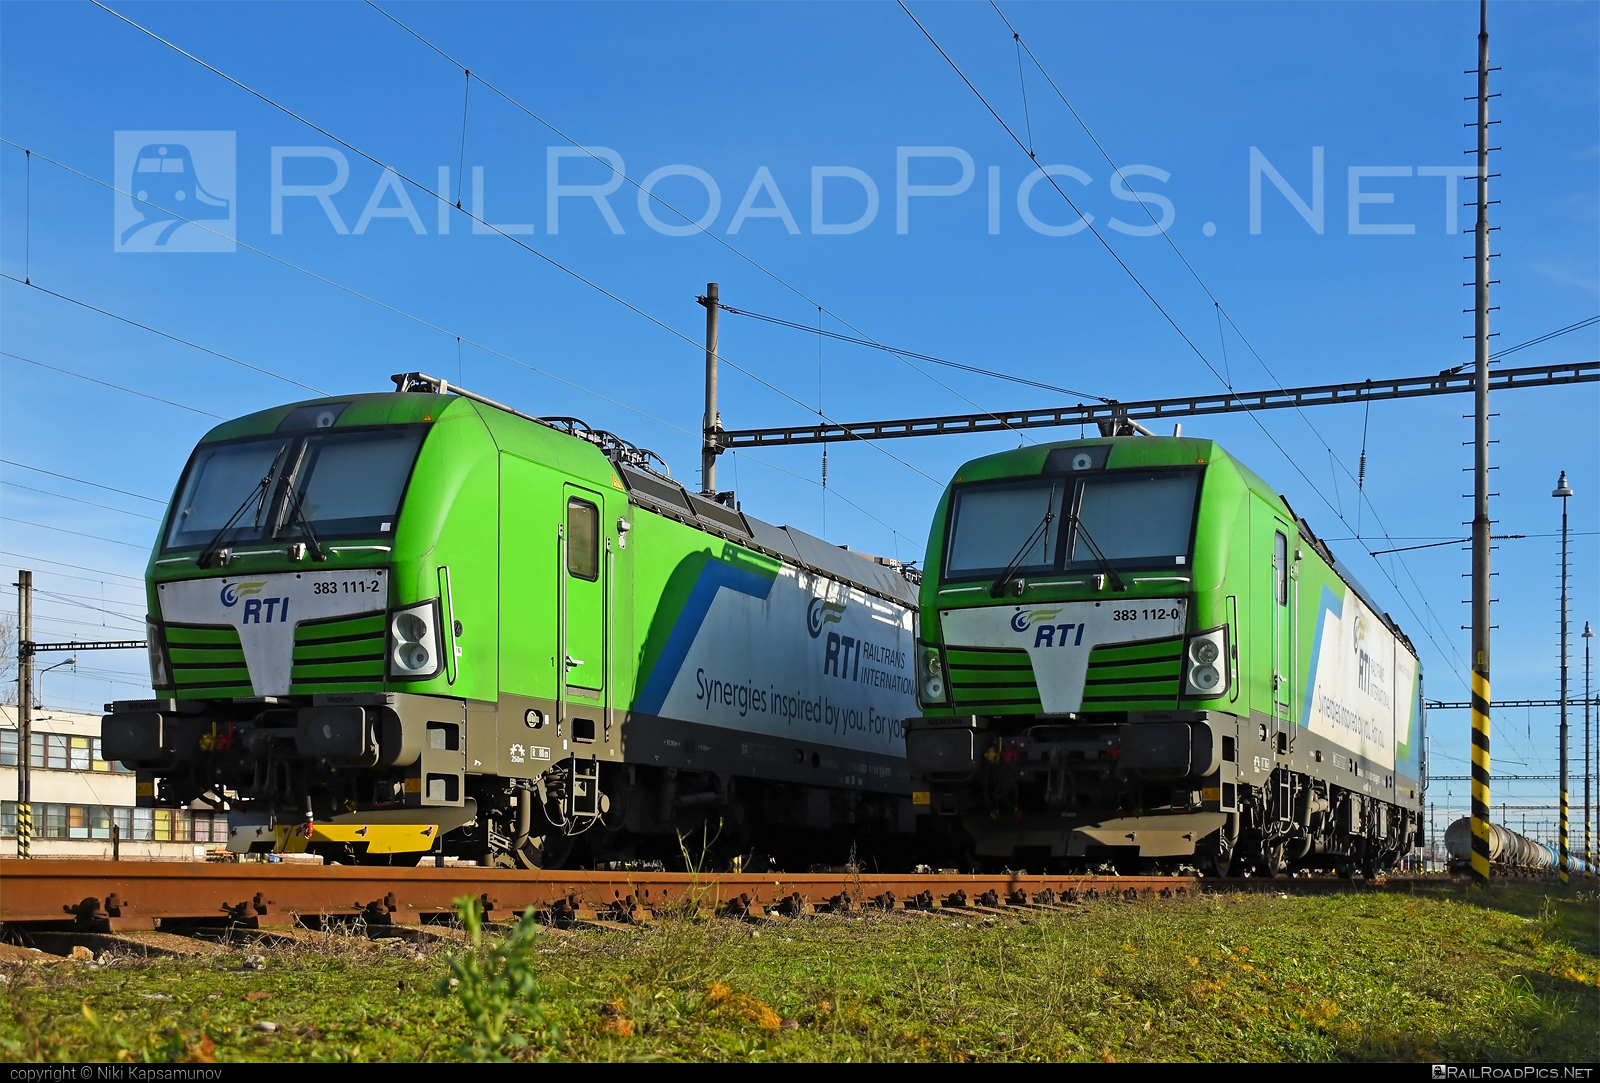 Siemens Vectron MS - 383 111-2 operated by Railtrans International, s.r.o #RailtransInternational #rti #siemens #siemensVectron #siemensVectronMS #vectron #vectronMS